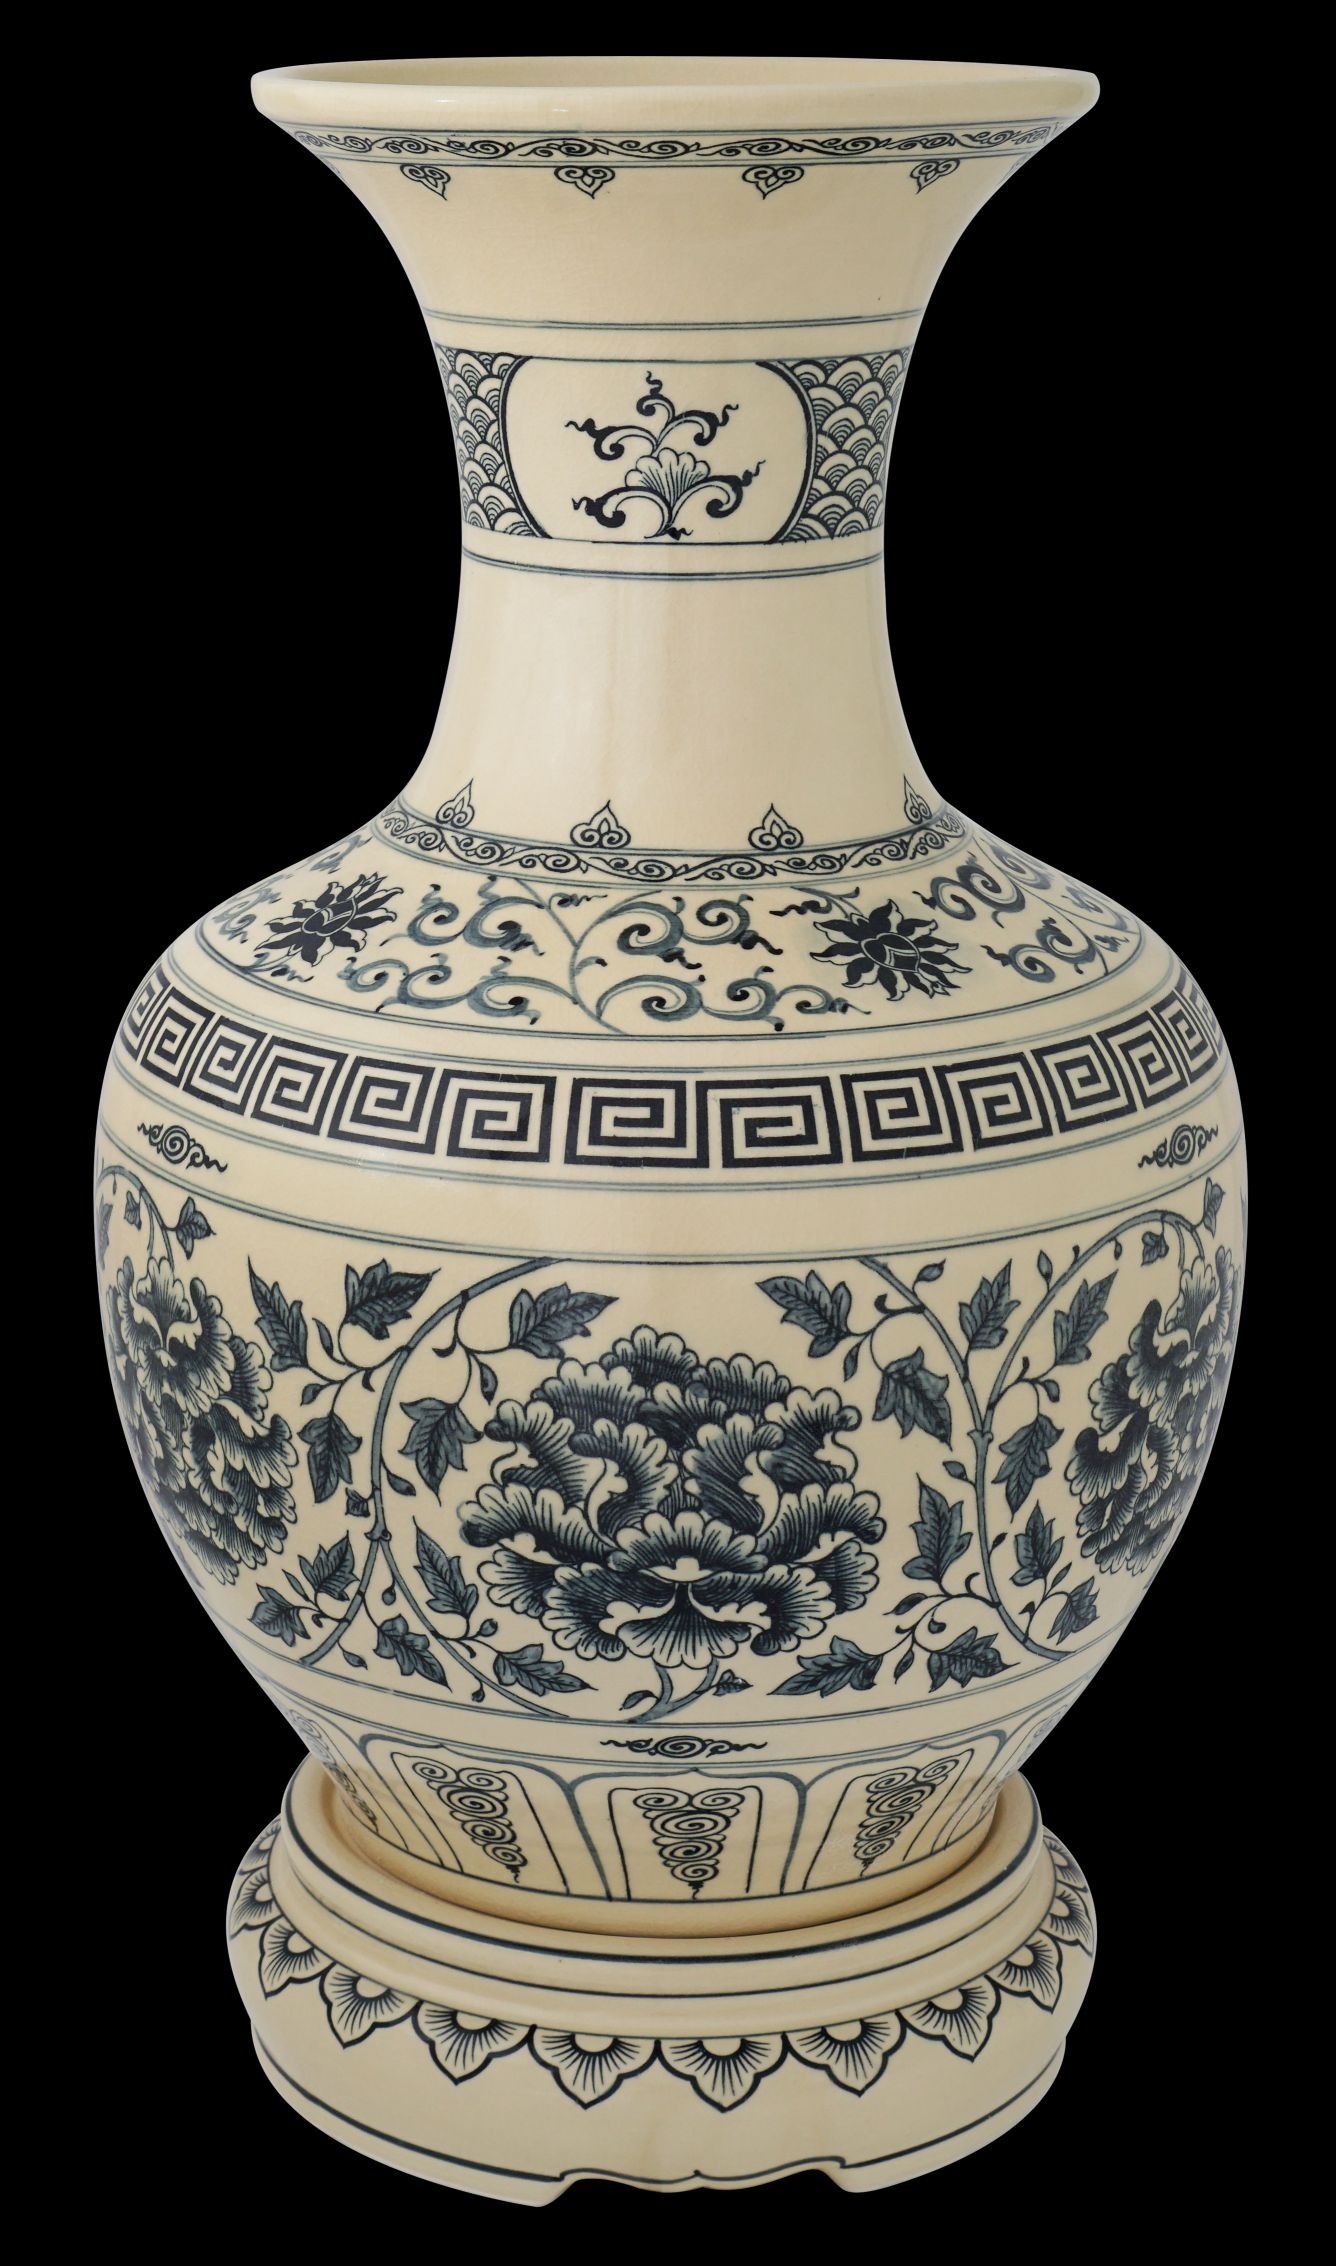 The Binh Phu Quy vase is one of Chu Dau's signature products 